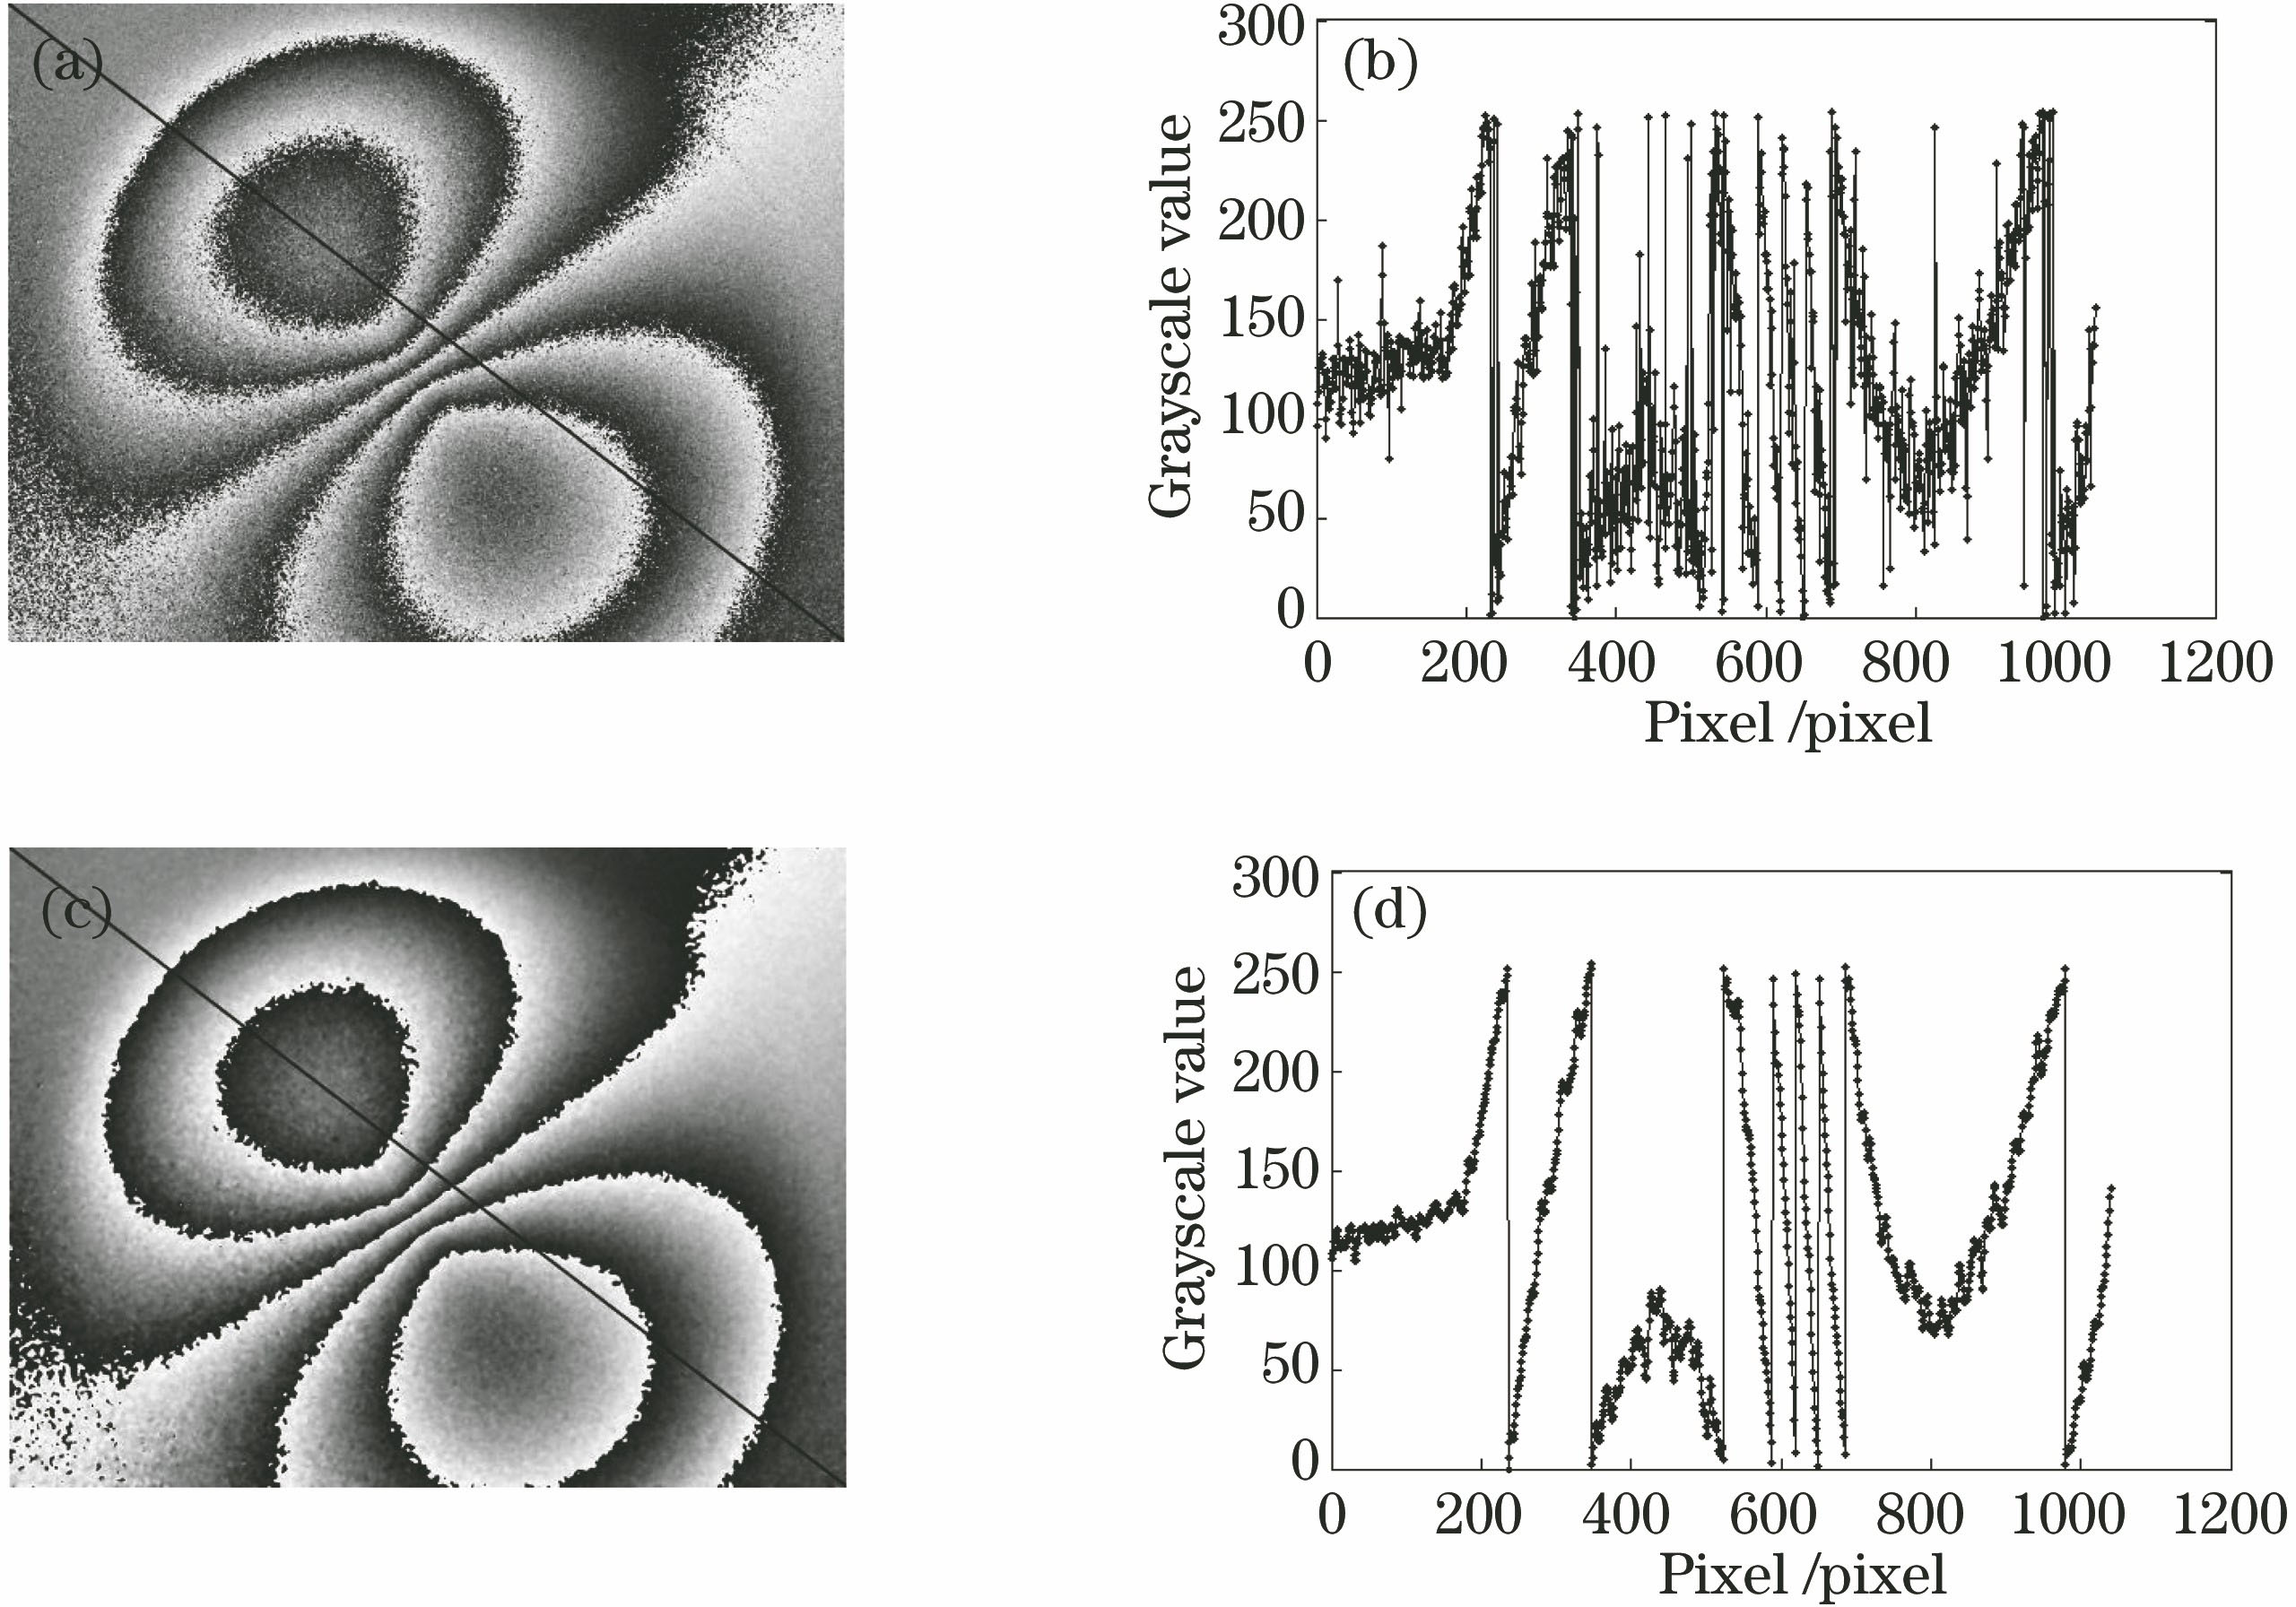 Phase map and phase distribution before and after filtering. (a) Original wrapped phase map; (b) phase distribution on the diagonal section of the original wrapped phase map; (c) filtered wrapped phase map; (d) phase distribution on the diagonal section of the filtered wrapped phase map